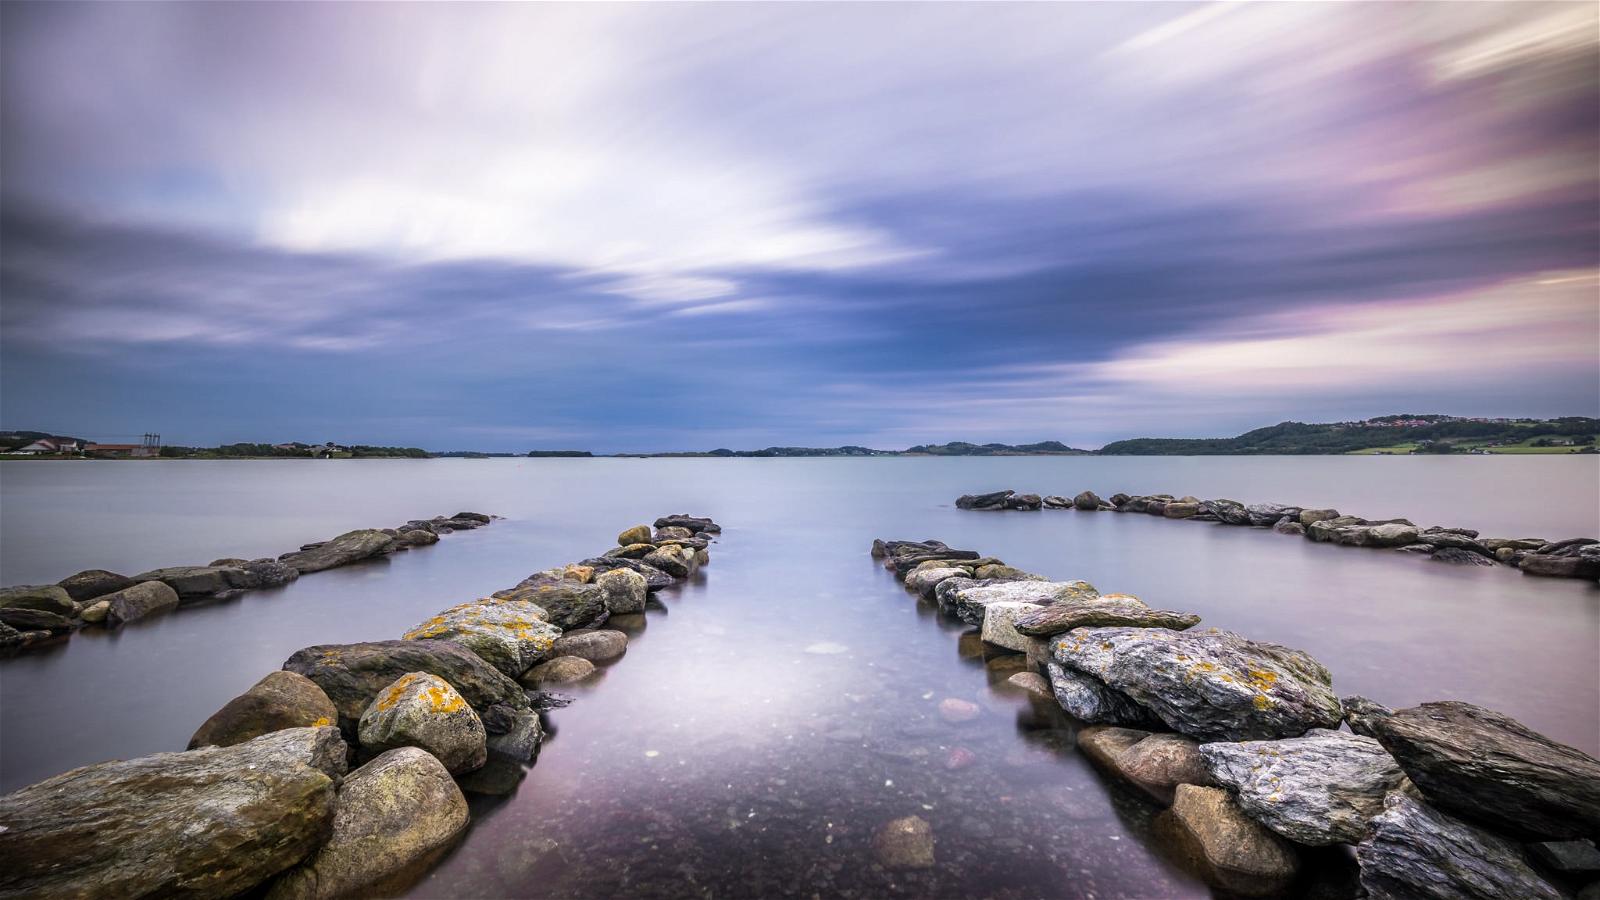 Hafrsfjord の画像. longexposure travel sunset sea sky seascape motion water weather norway clouds reflections landscape geotagged photography stavanger photo hafrsfjord rocks europe no sony fjord fullframe onsale ultrawide a7 rogaland bythesea sonya7 sonyfe1635